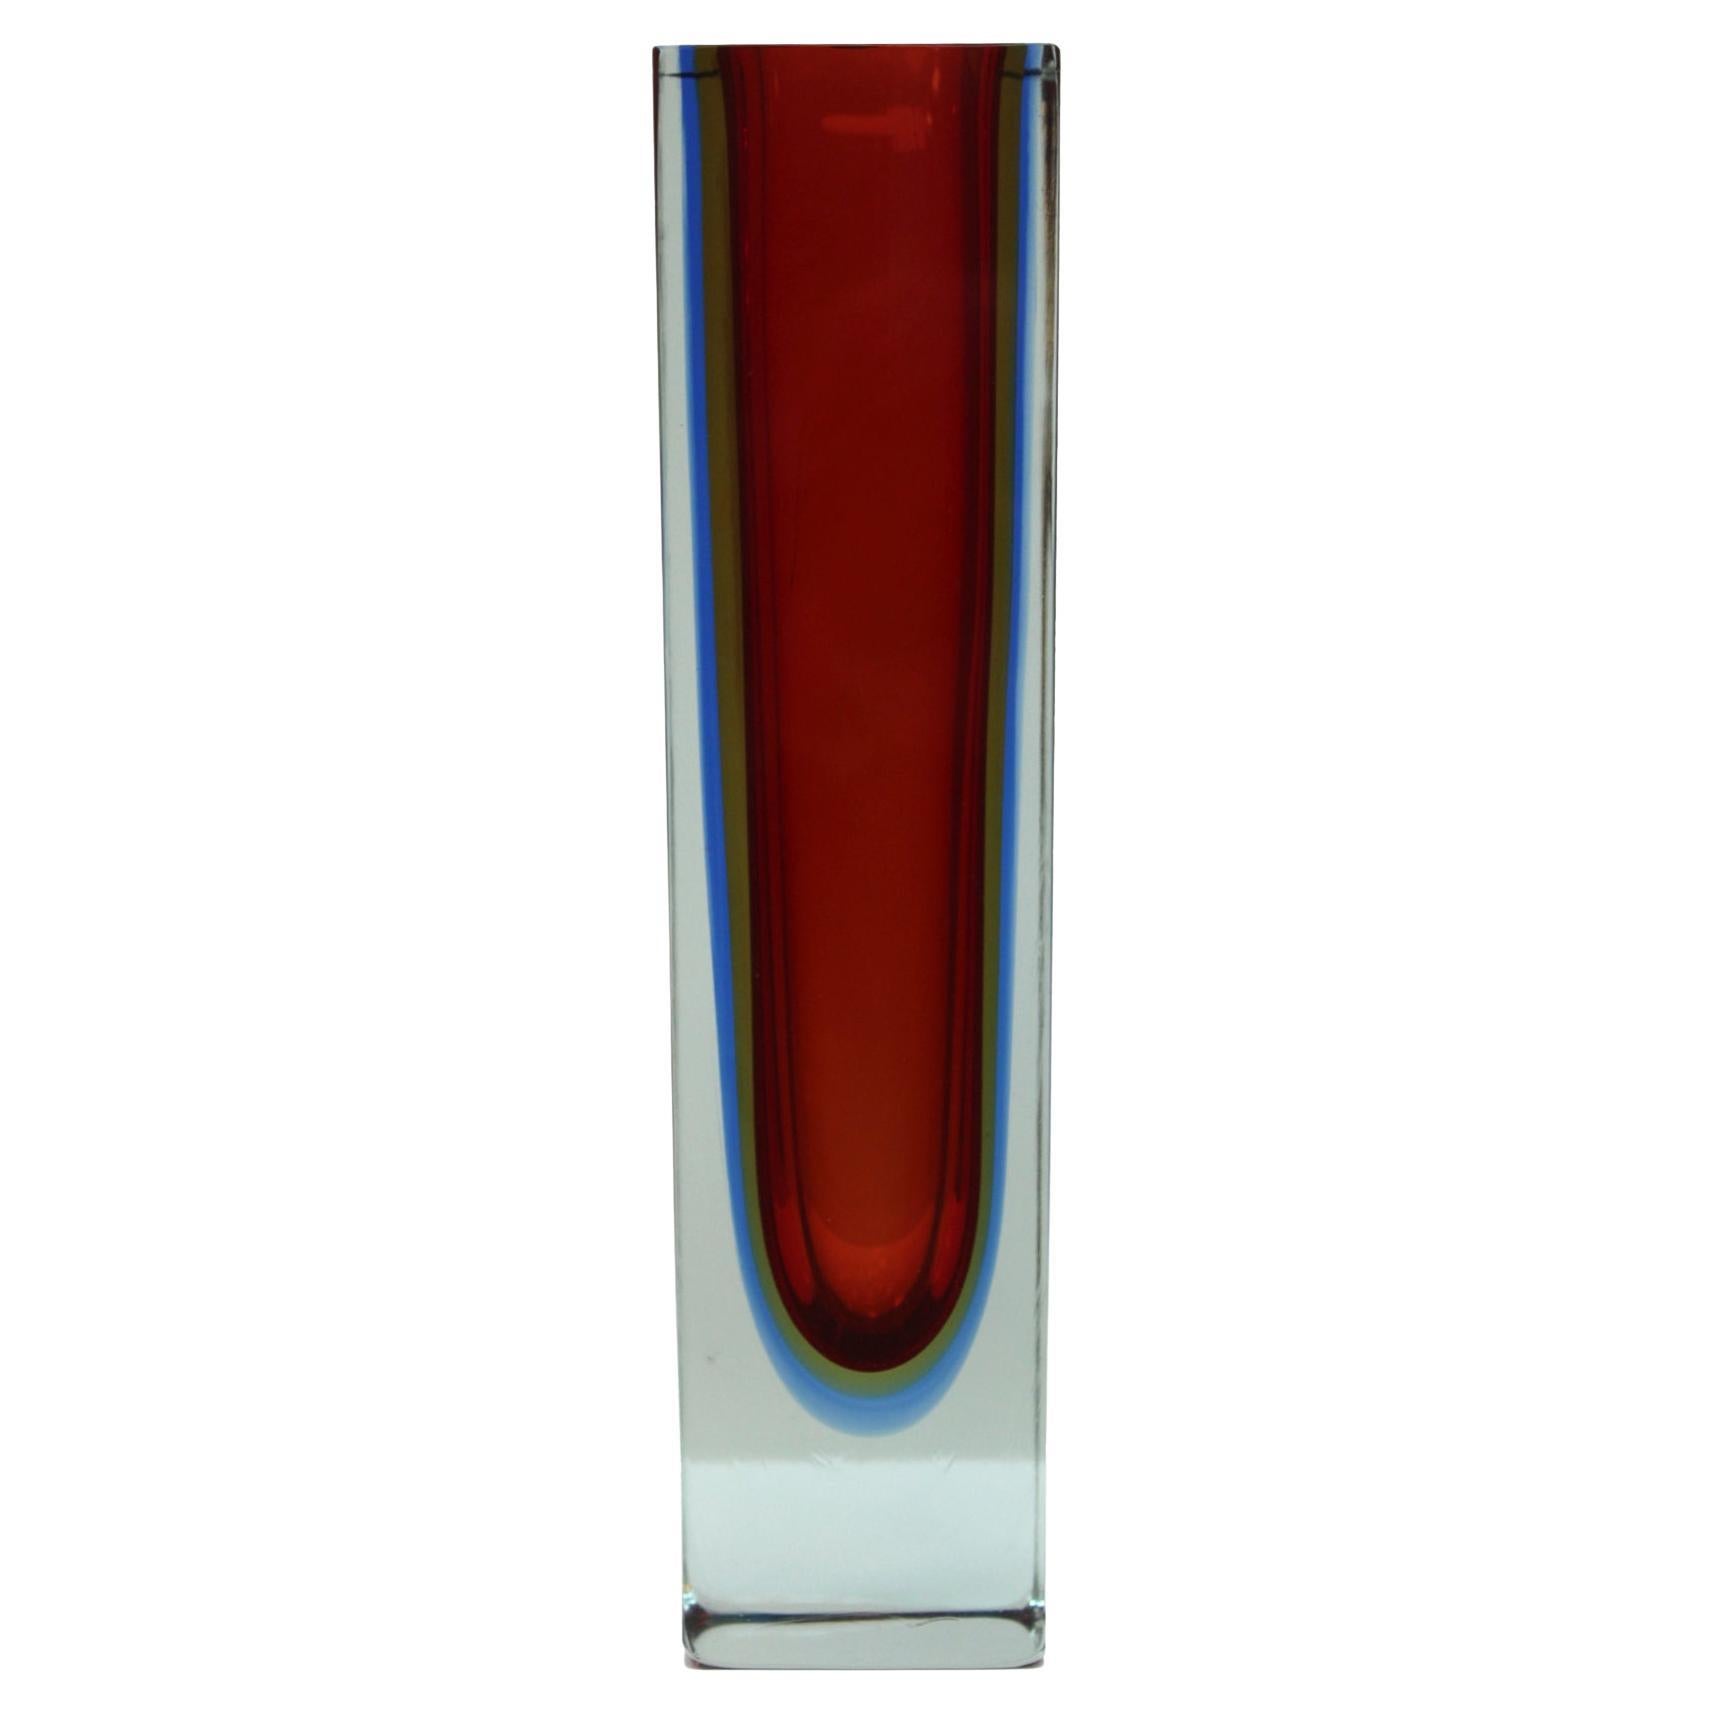 Mid-Century Modern Red and Blue Sommerso Murano Glass Vase by Flavio Poli 1950 For Sale